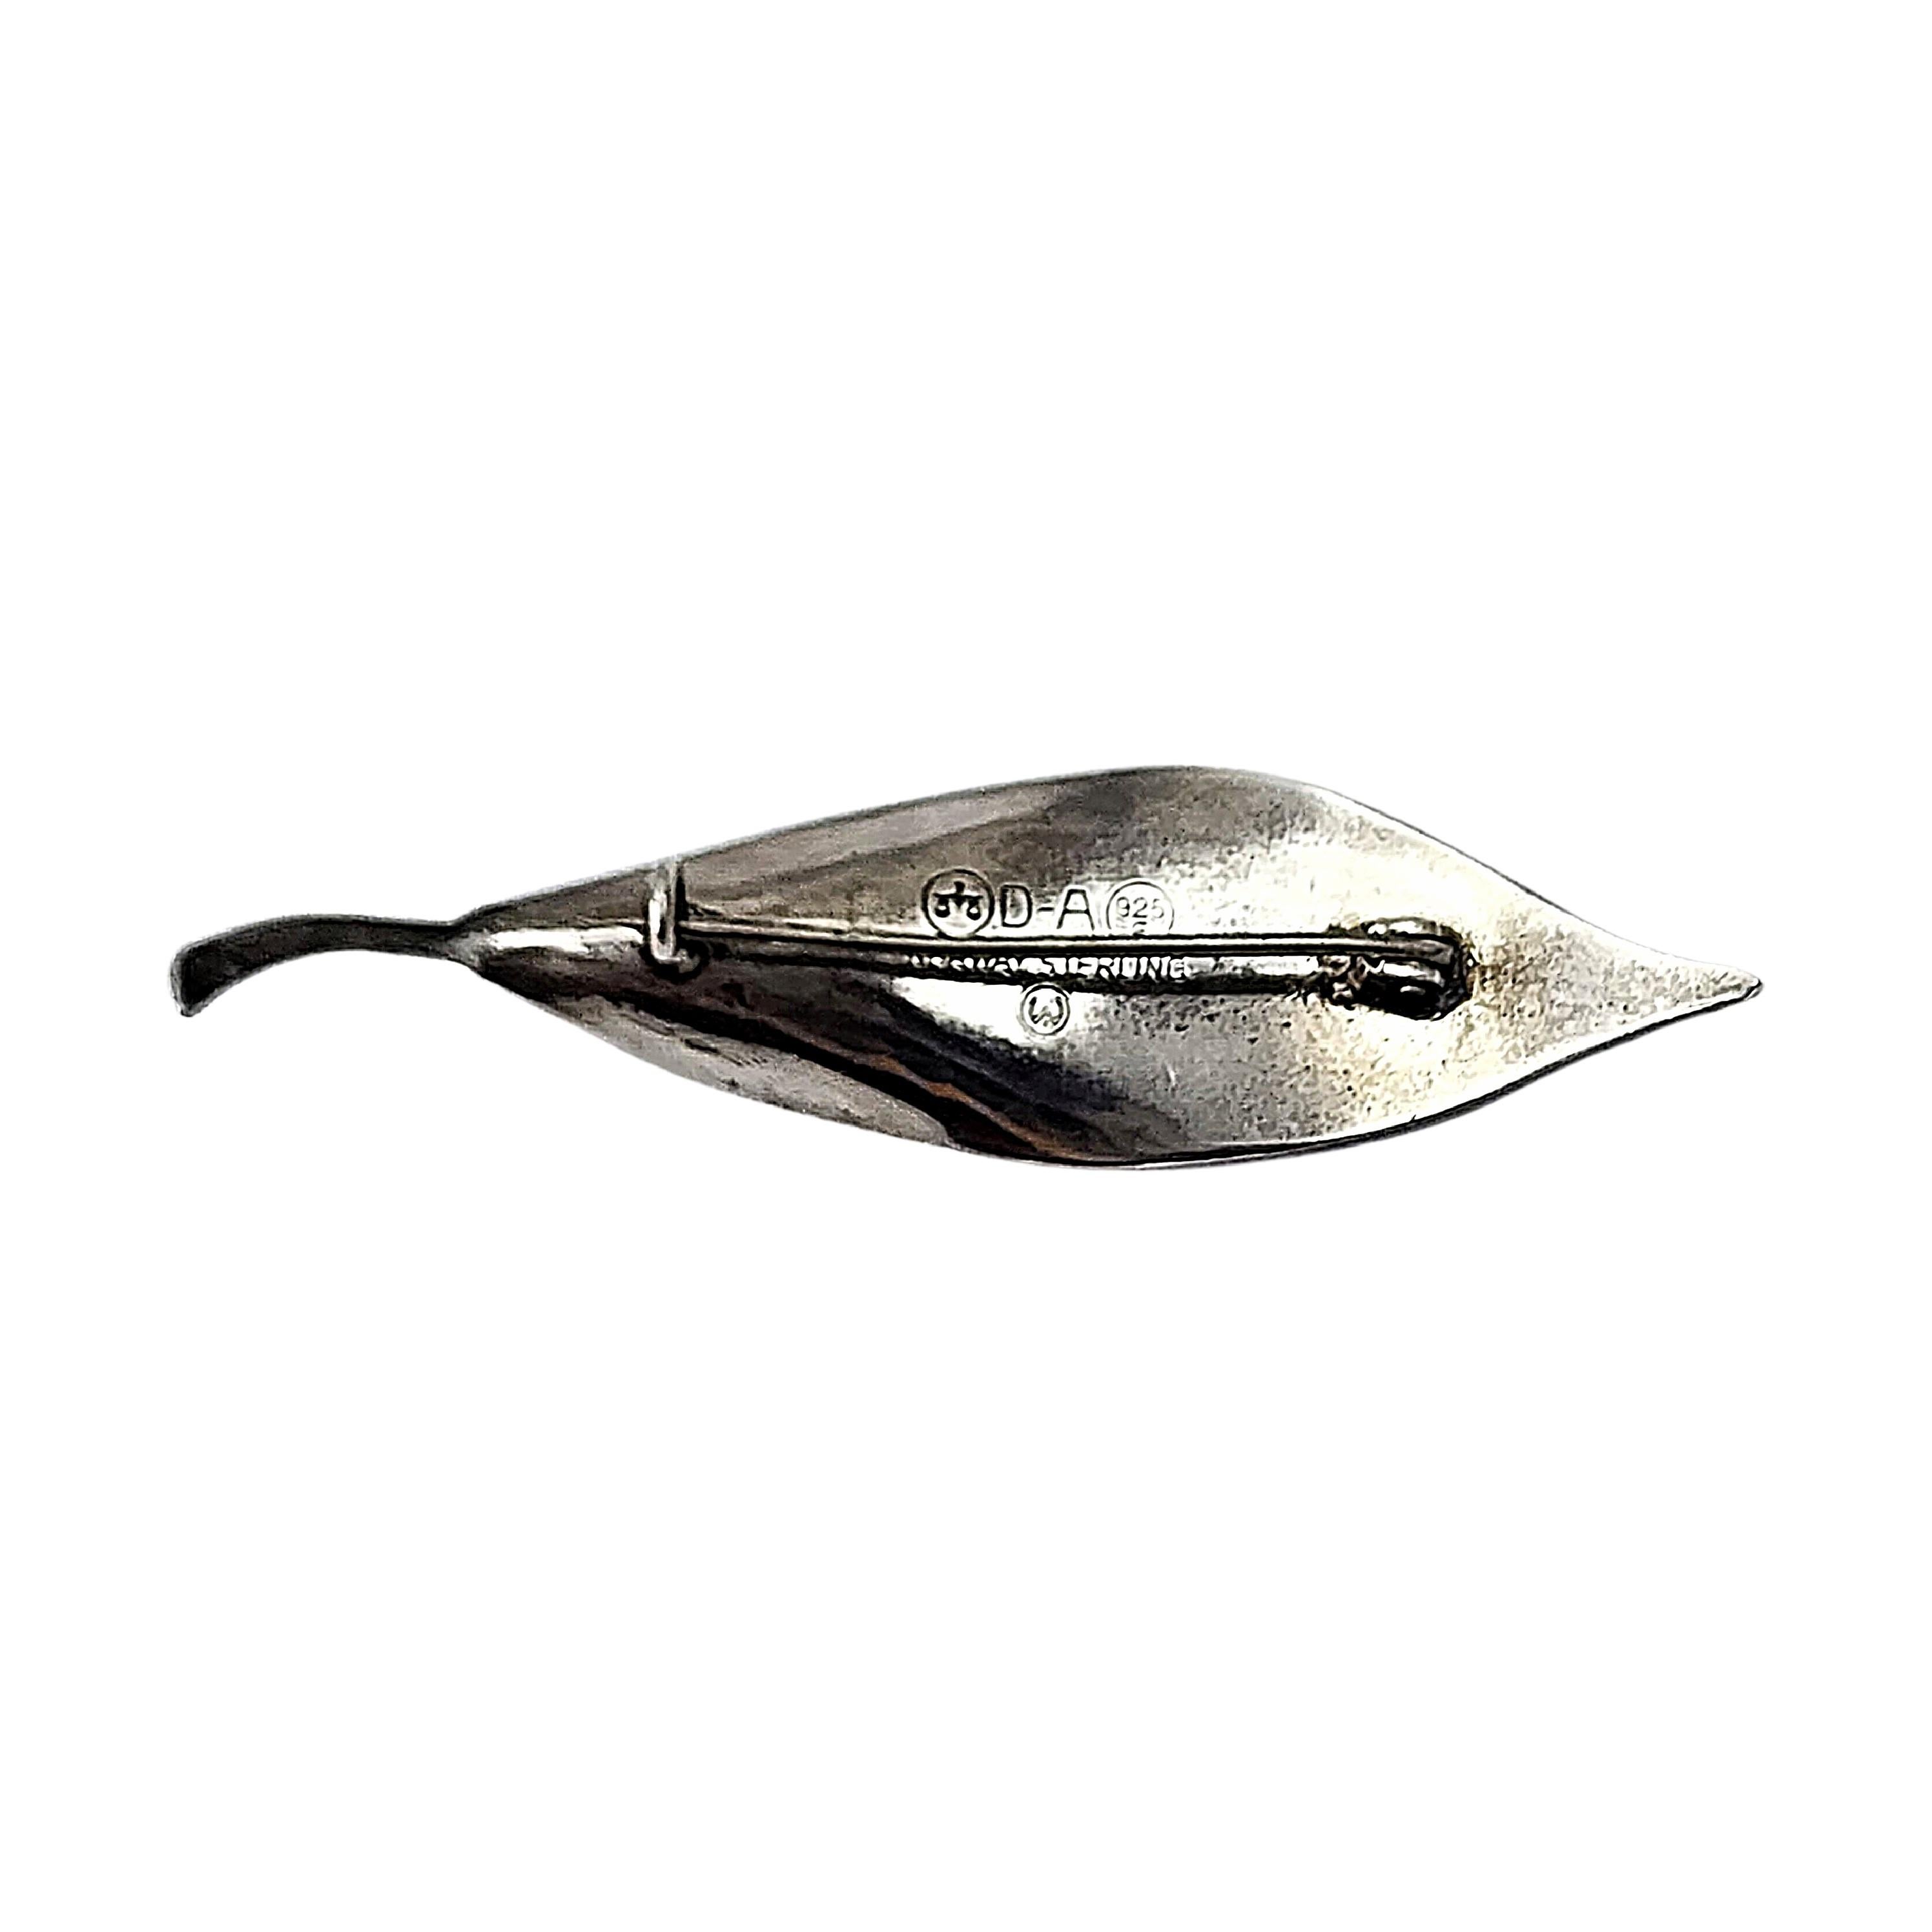 Vintage sterling silver leaf pin/brooch by David Andersen Norway.

This long and narrow sterling silver leaf pin is detailed with black oxidized vein accents.

Measures approx 2 3/4